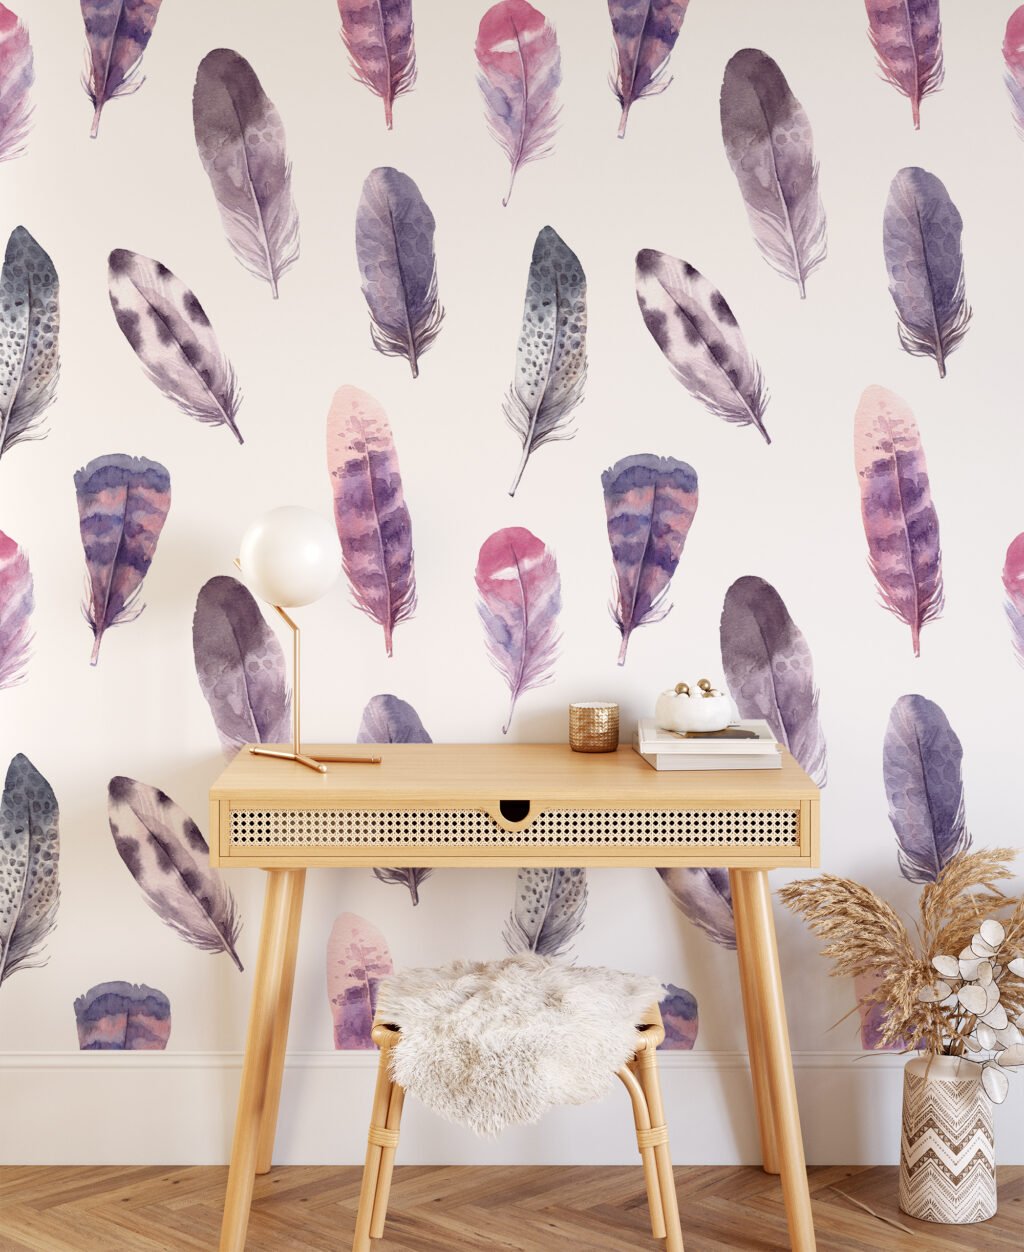 Watercolor Pastel Feathers Pattern Wallpaper, Whispering Soft Feathers Peel & Stick Wall Mural